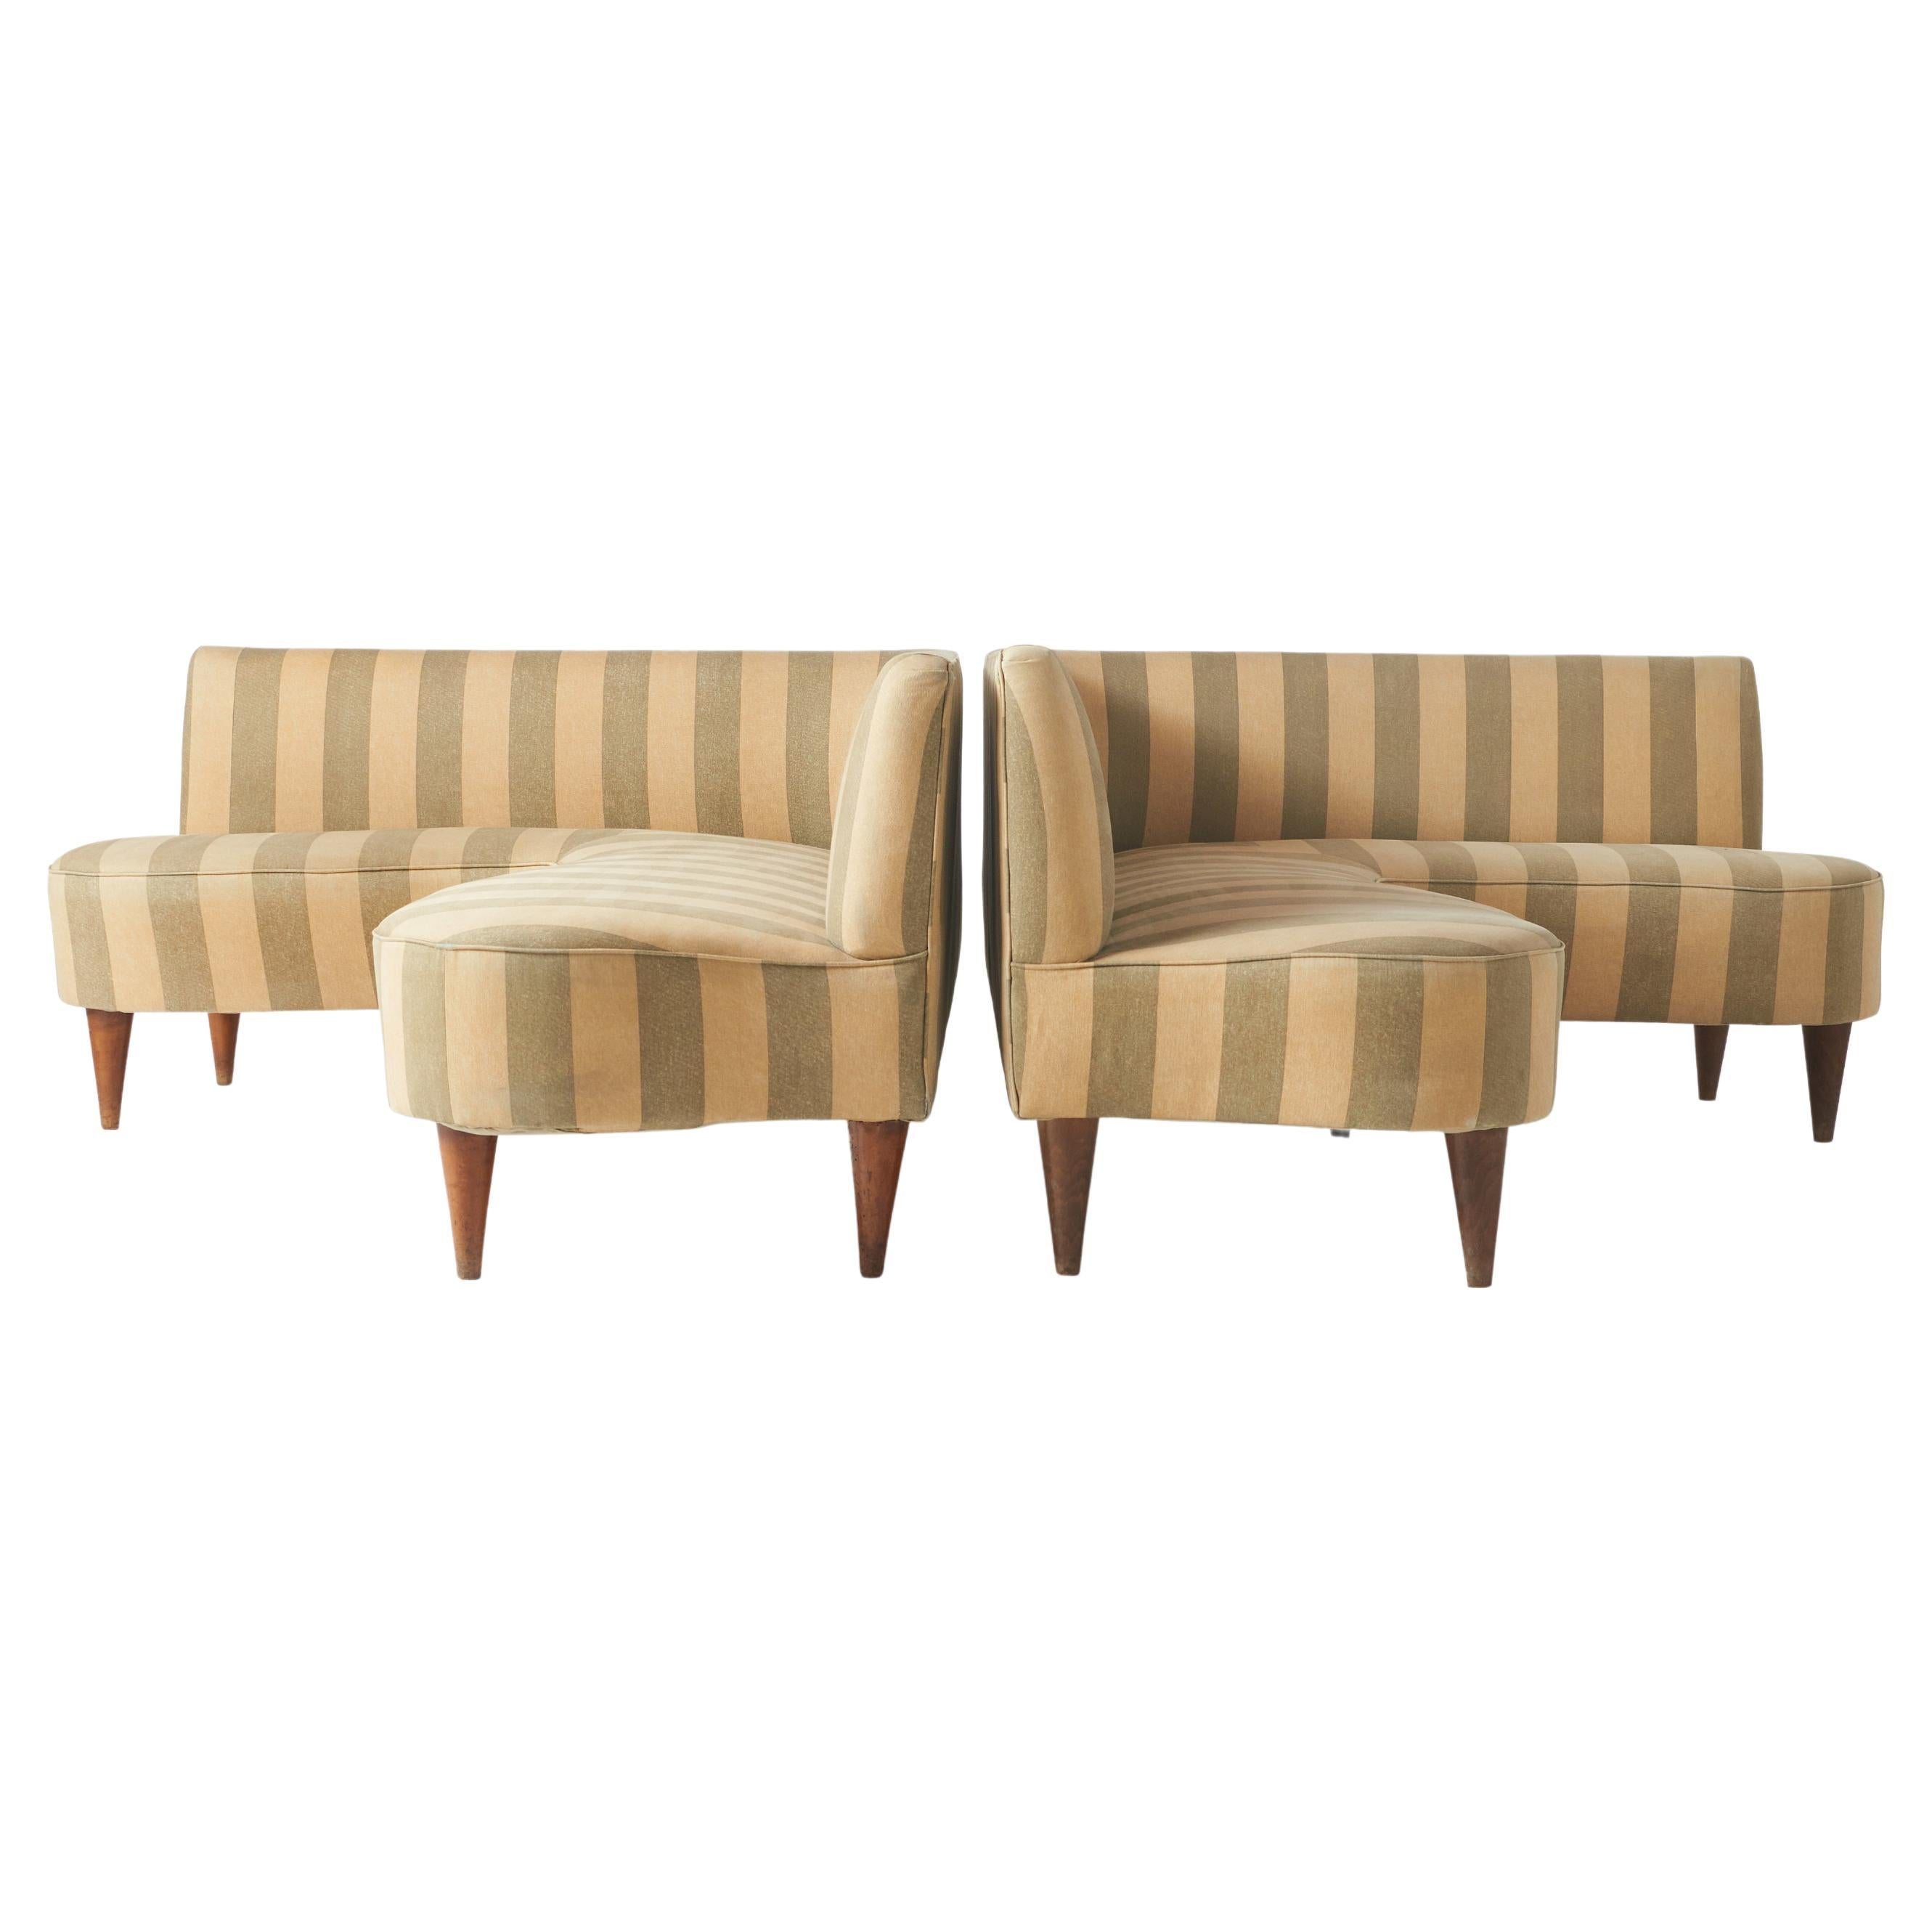 A pair of L shaped sofas by Giulio Minoletti For Sale